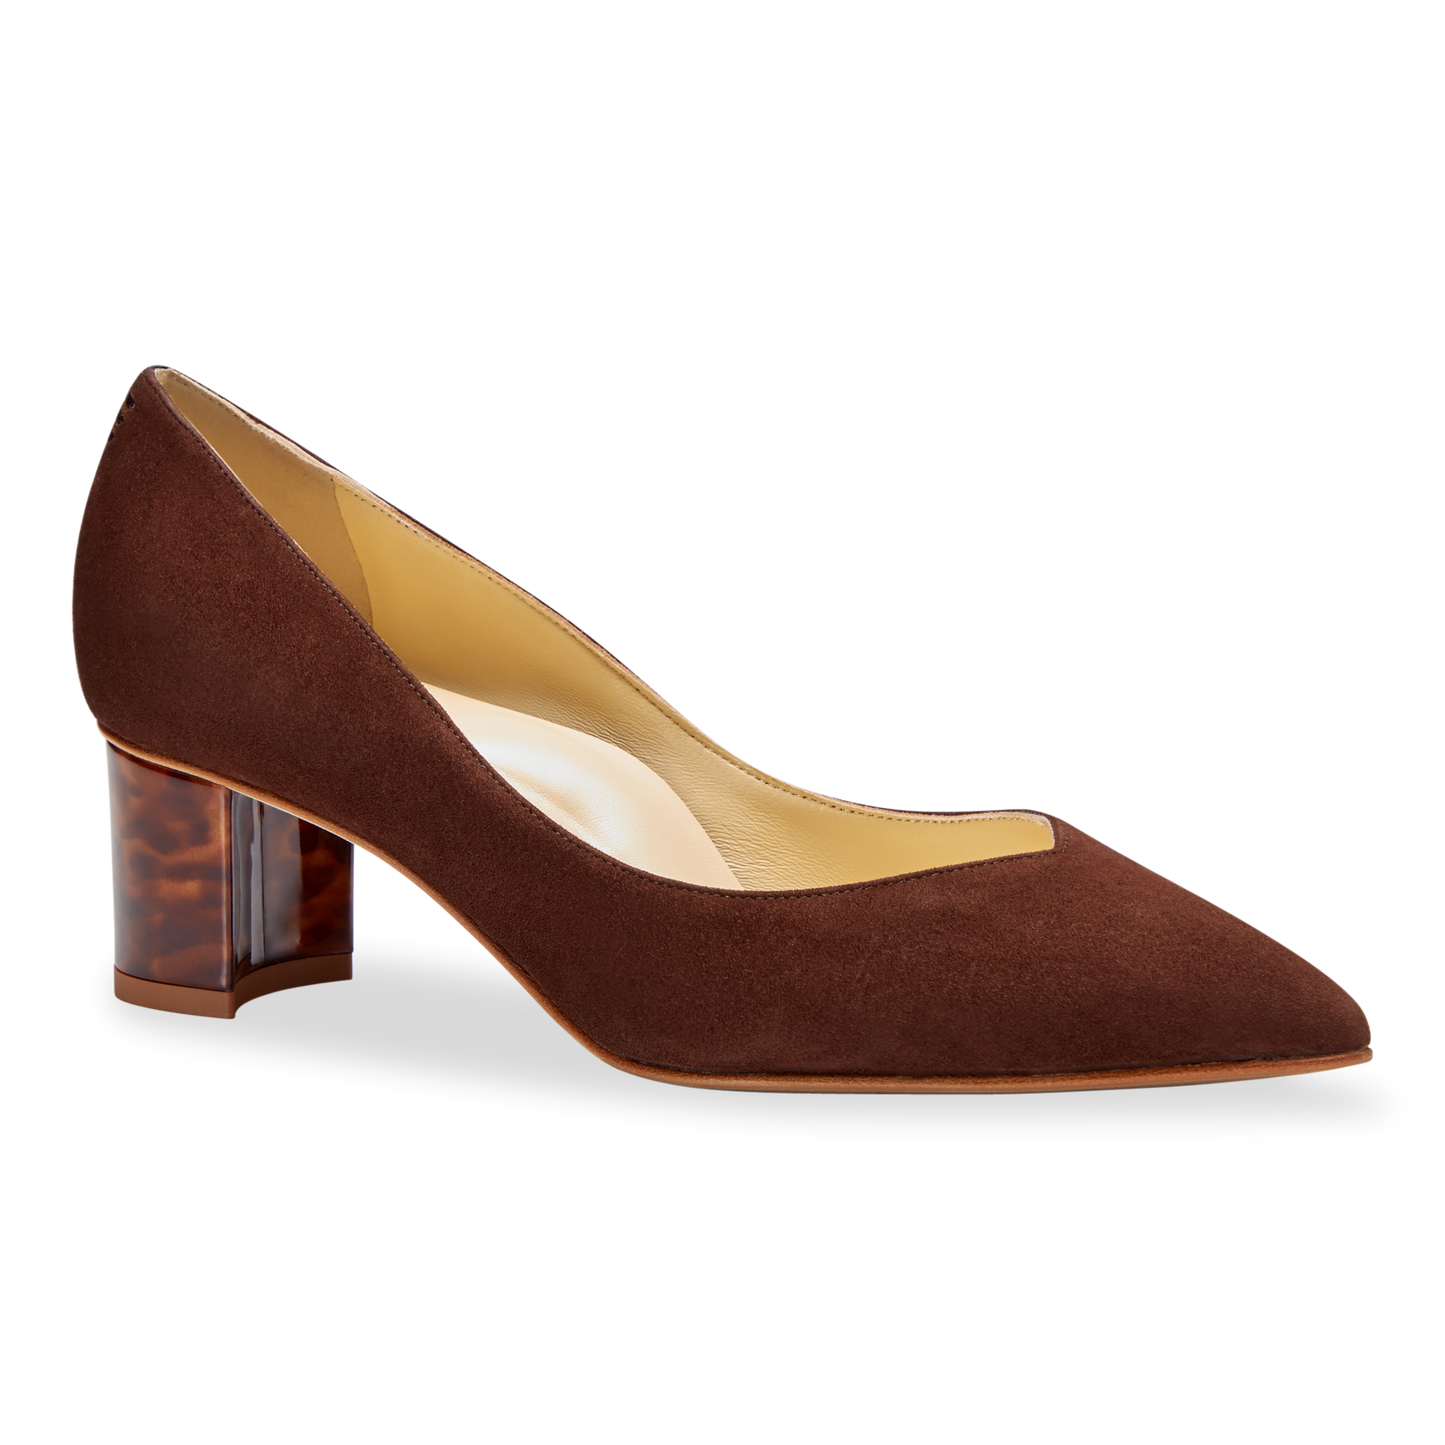 50mm Italian Made Pointed Toe Perfect Emma Pump in Espresso Suede